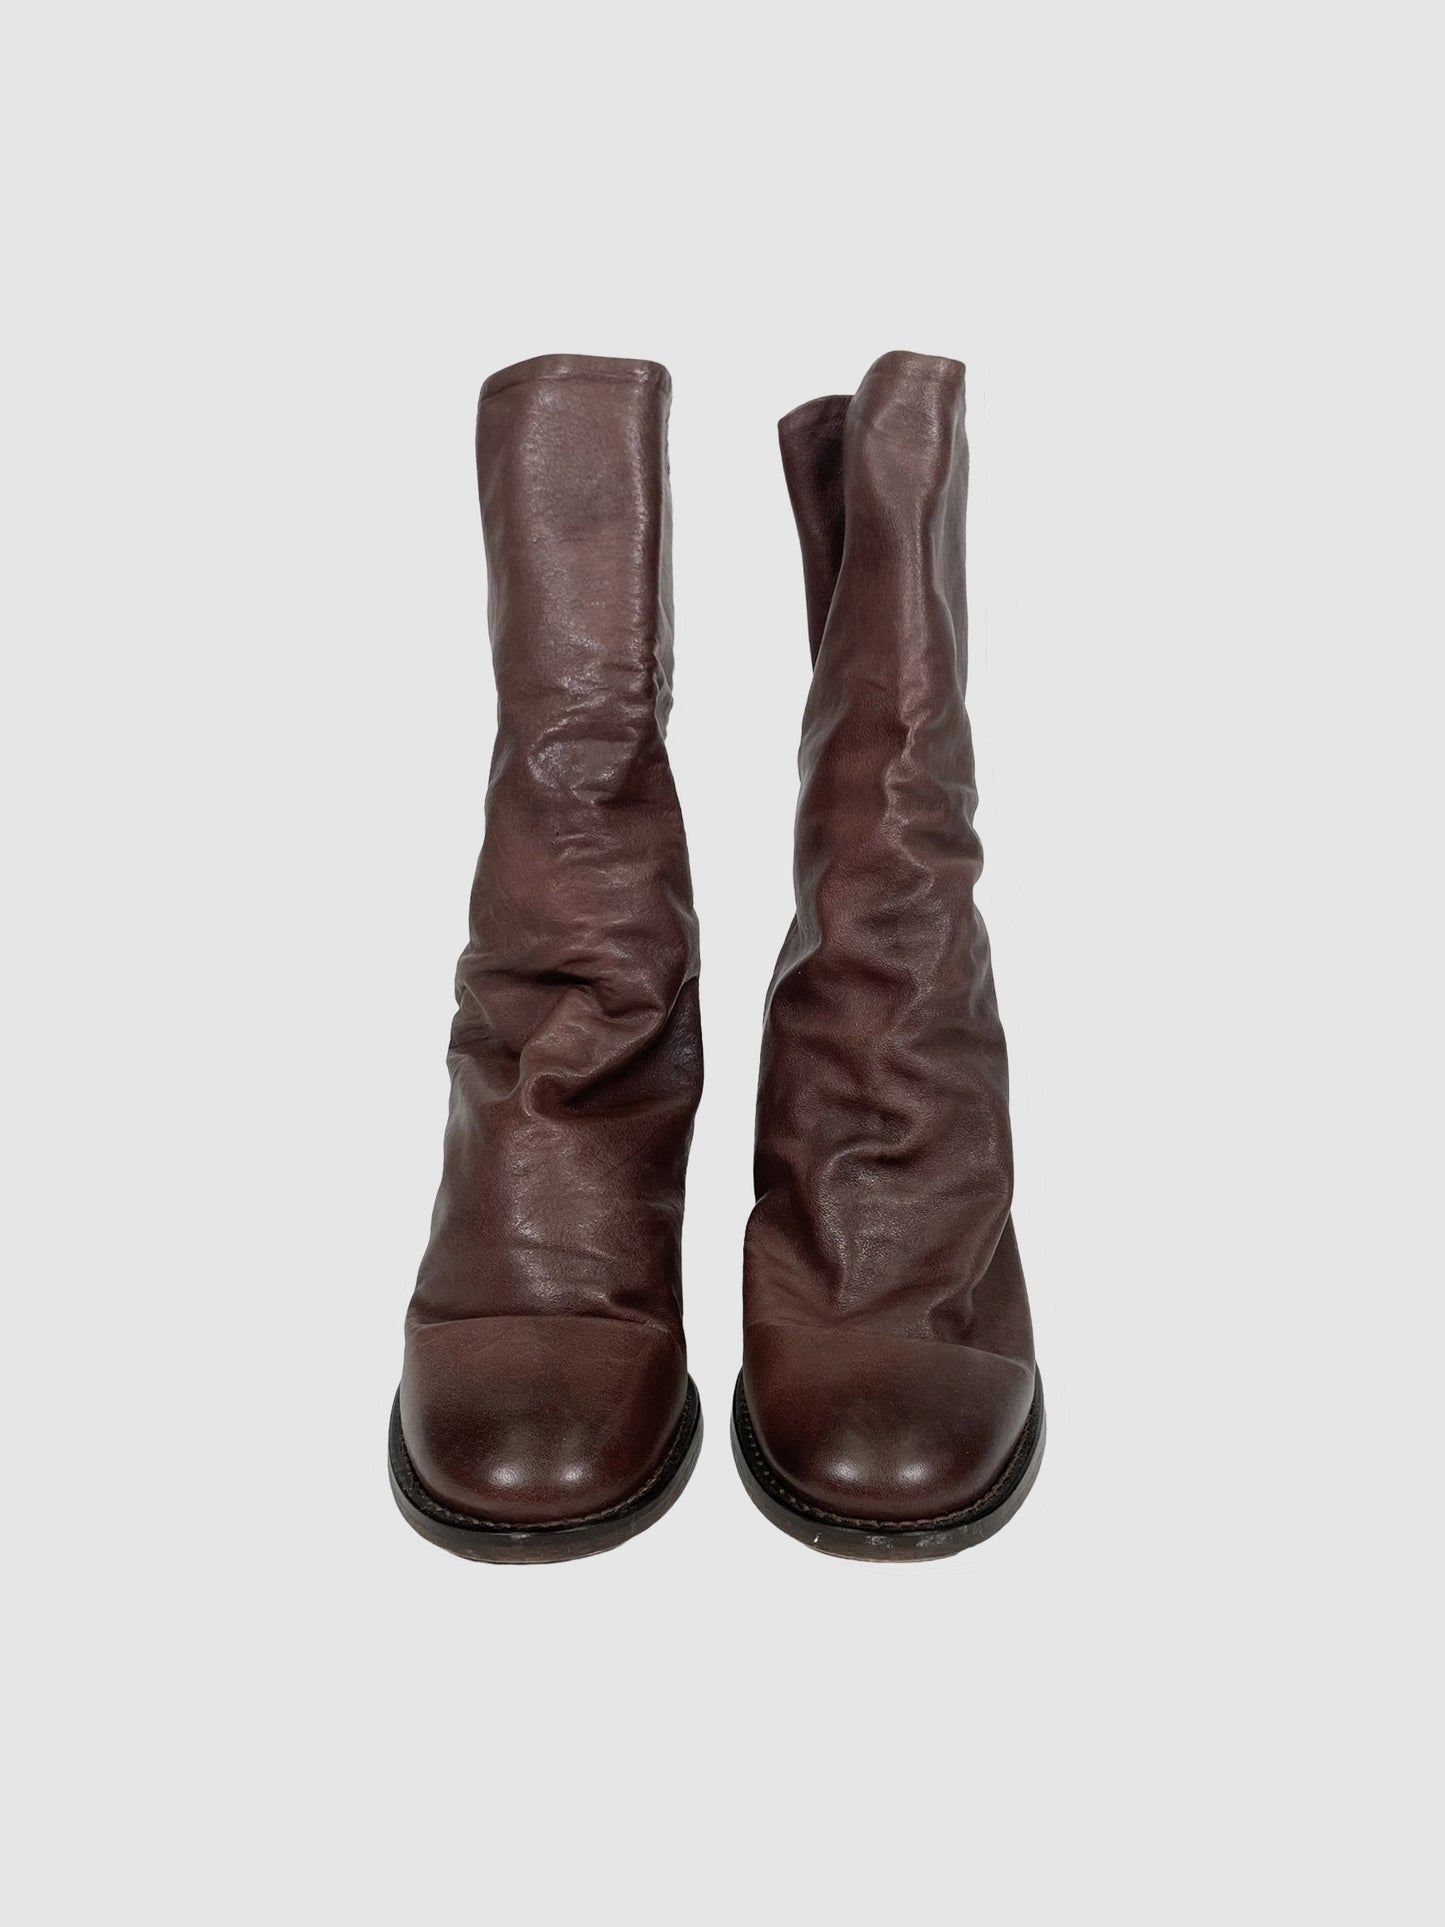 Free People Tall Leather Boots - Size 38